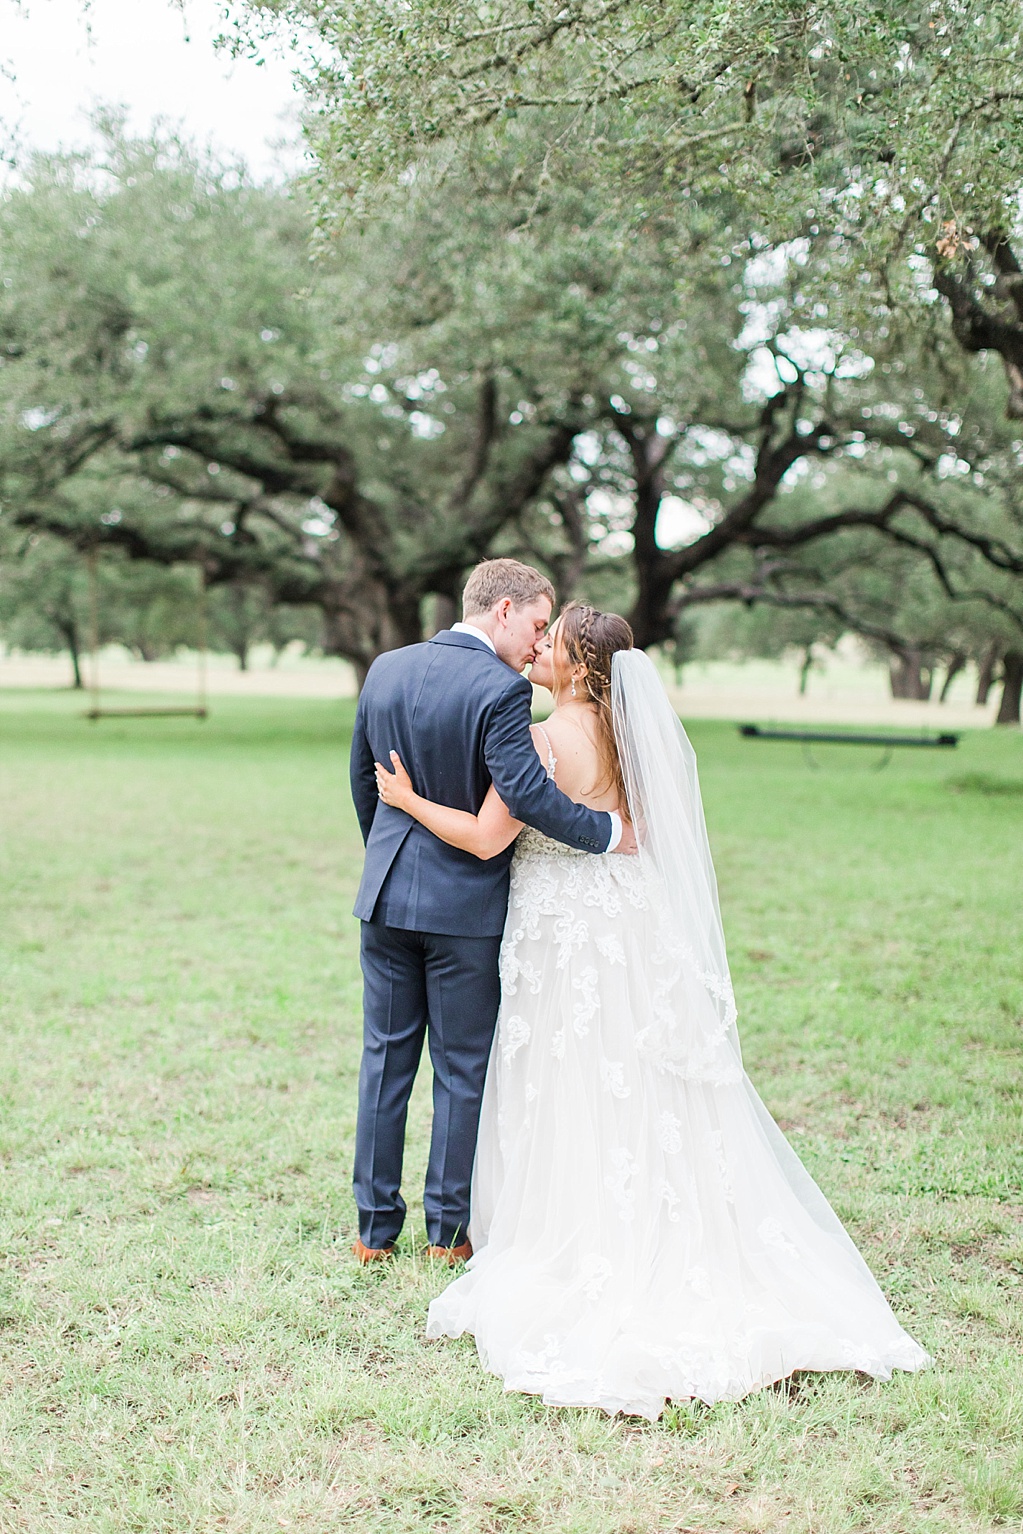 The Oaks at Boerne Wedding Photos by Allison Jeffers Photography 0090